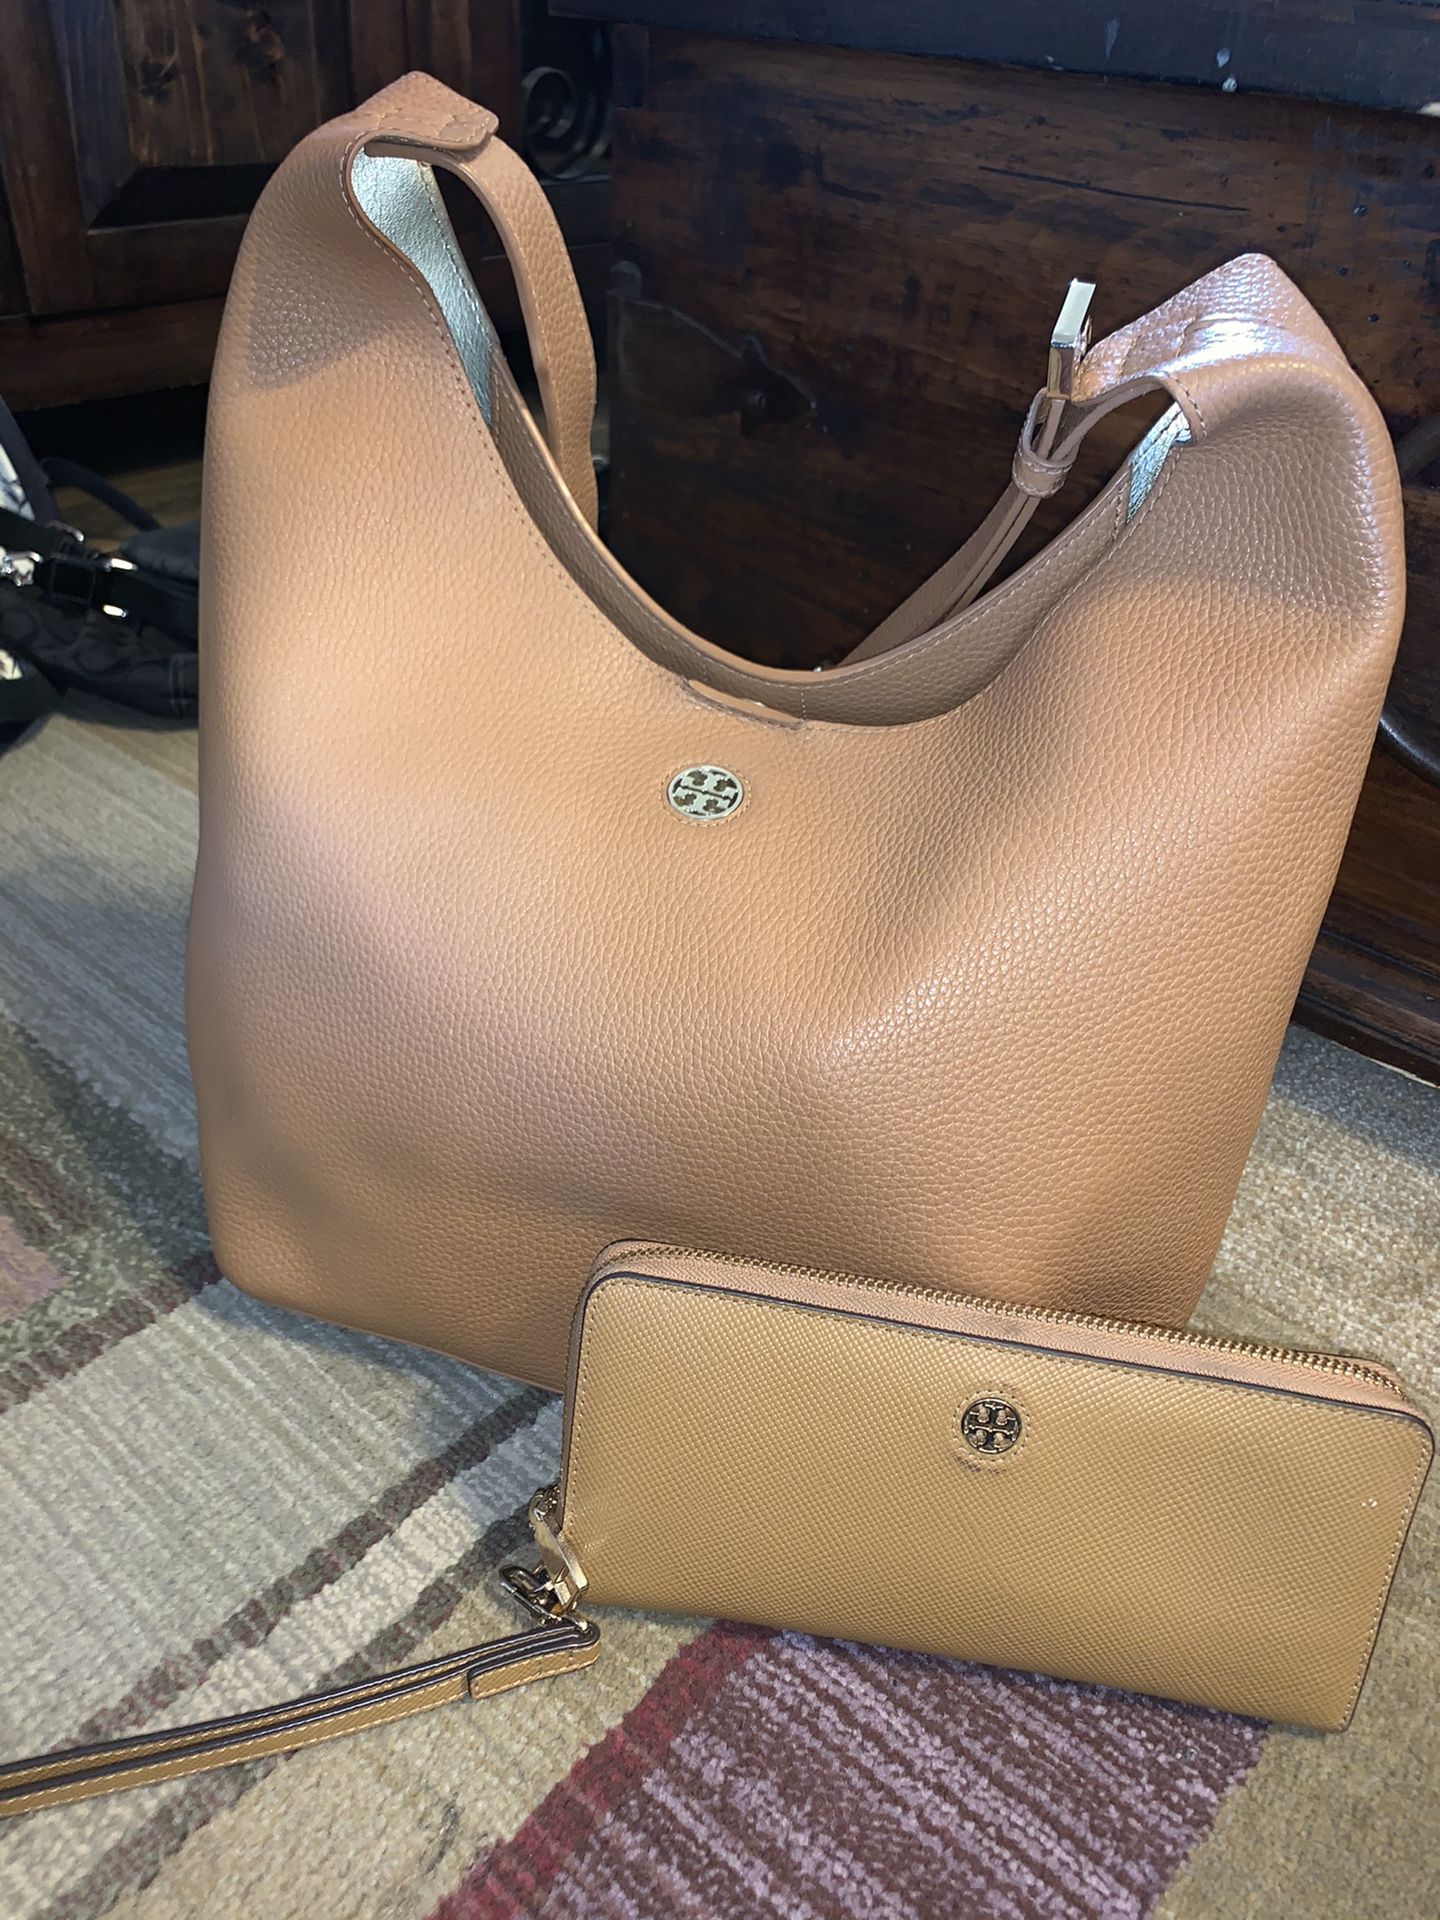 Brown Tory Burch Bag And Wallet Set